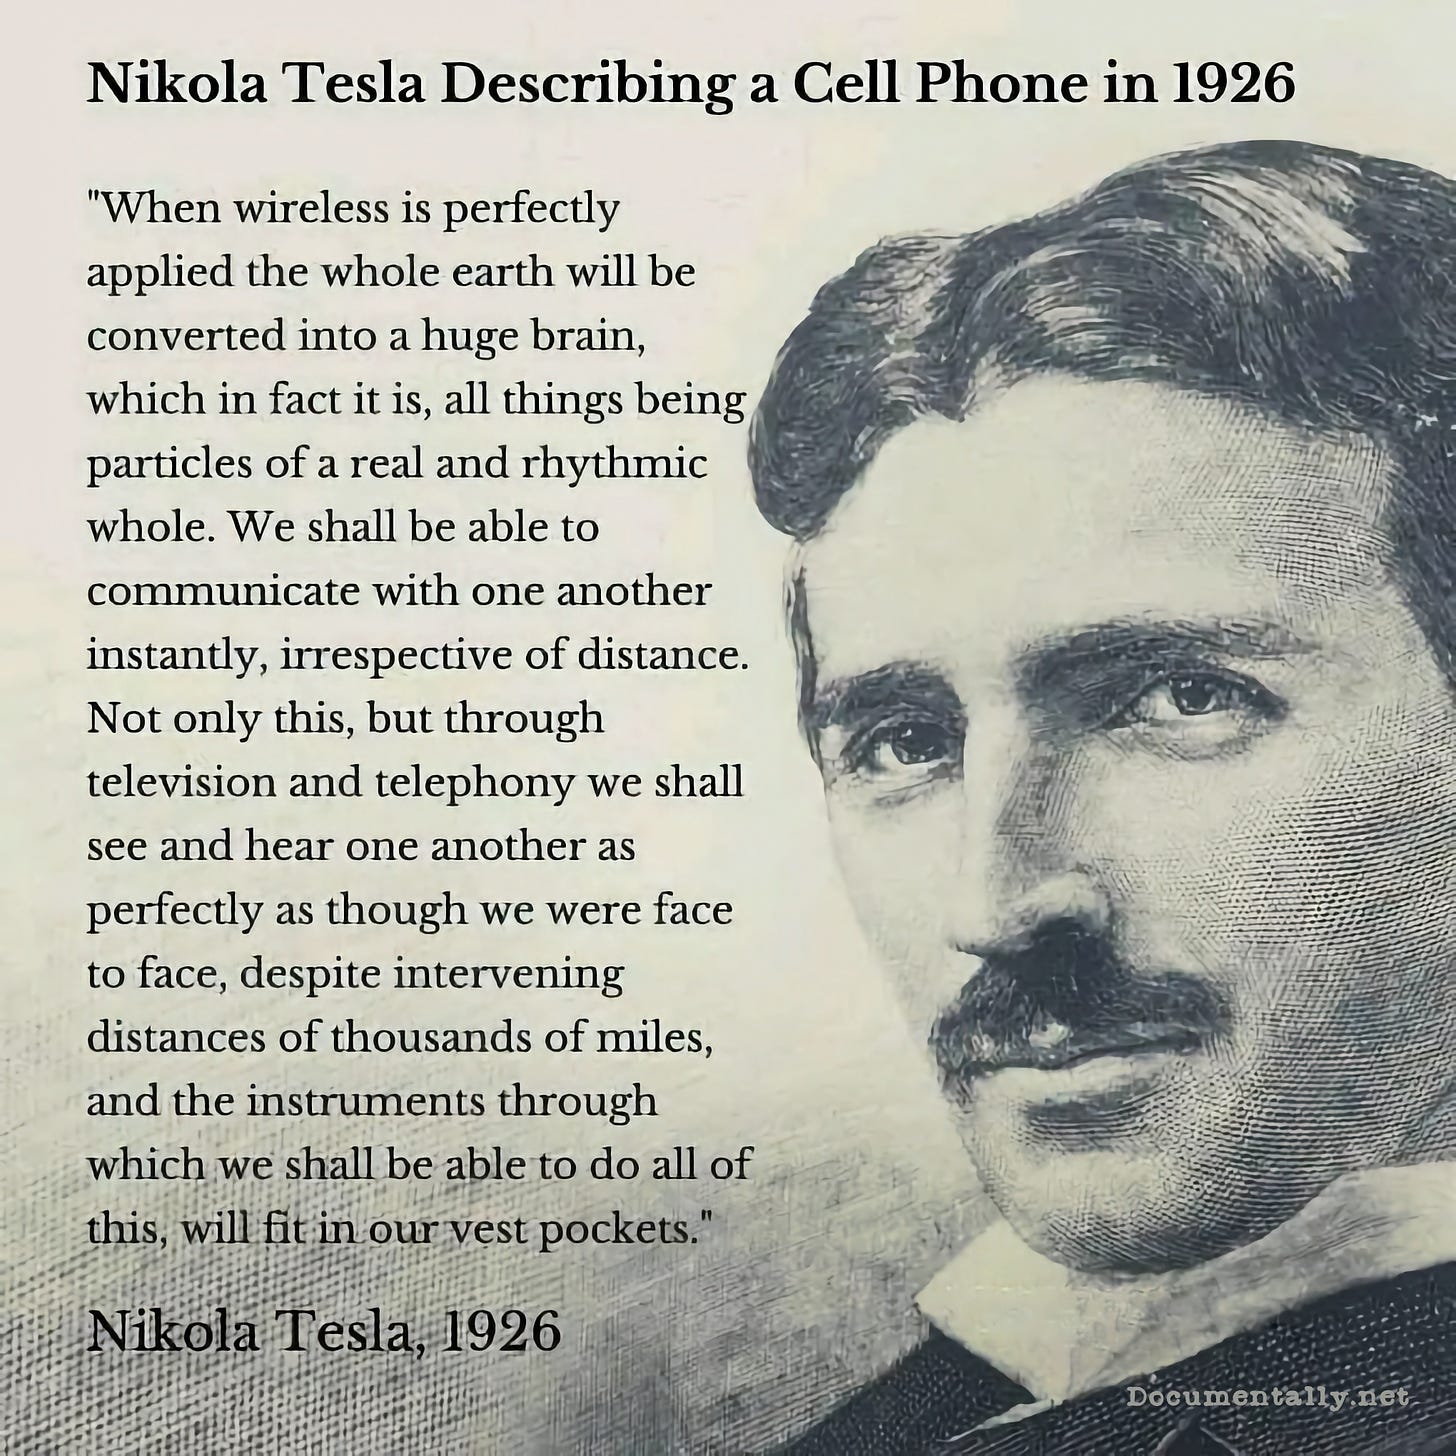 A quote from Nichola Tesla describing a cell phone in 1926. When wireless is perfectly applied, the whole earth will be converted into a huge brain, which, in fact it is, all things being particles of a real and rhythmic whole.  We shall be able to communicate with one another instantly, irrespective of distance. Not only this, but through television and telephony, we shall see and hear one another, as perfectly, as though we were face-to-face, despite intervening distances of thousands of miles, and the instruments, through which we shall be able to do all of this, will fit in our vest pockets.